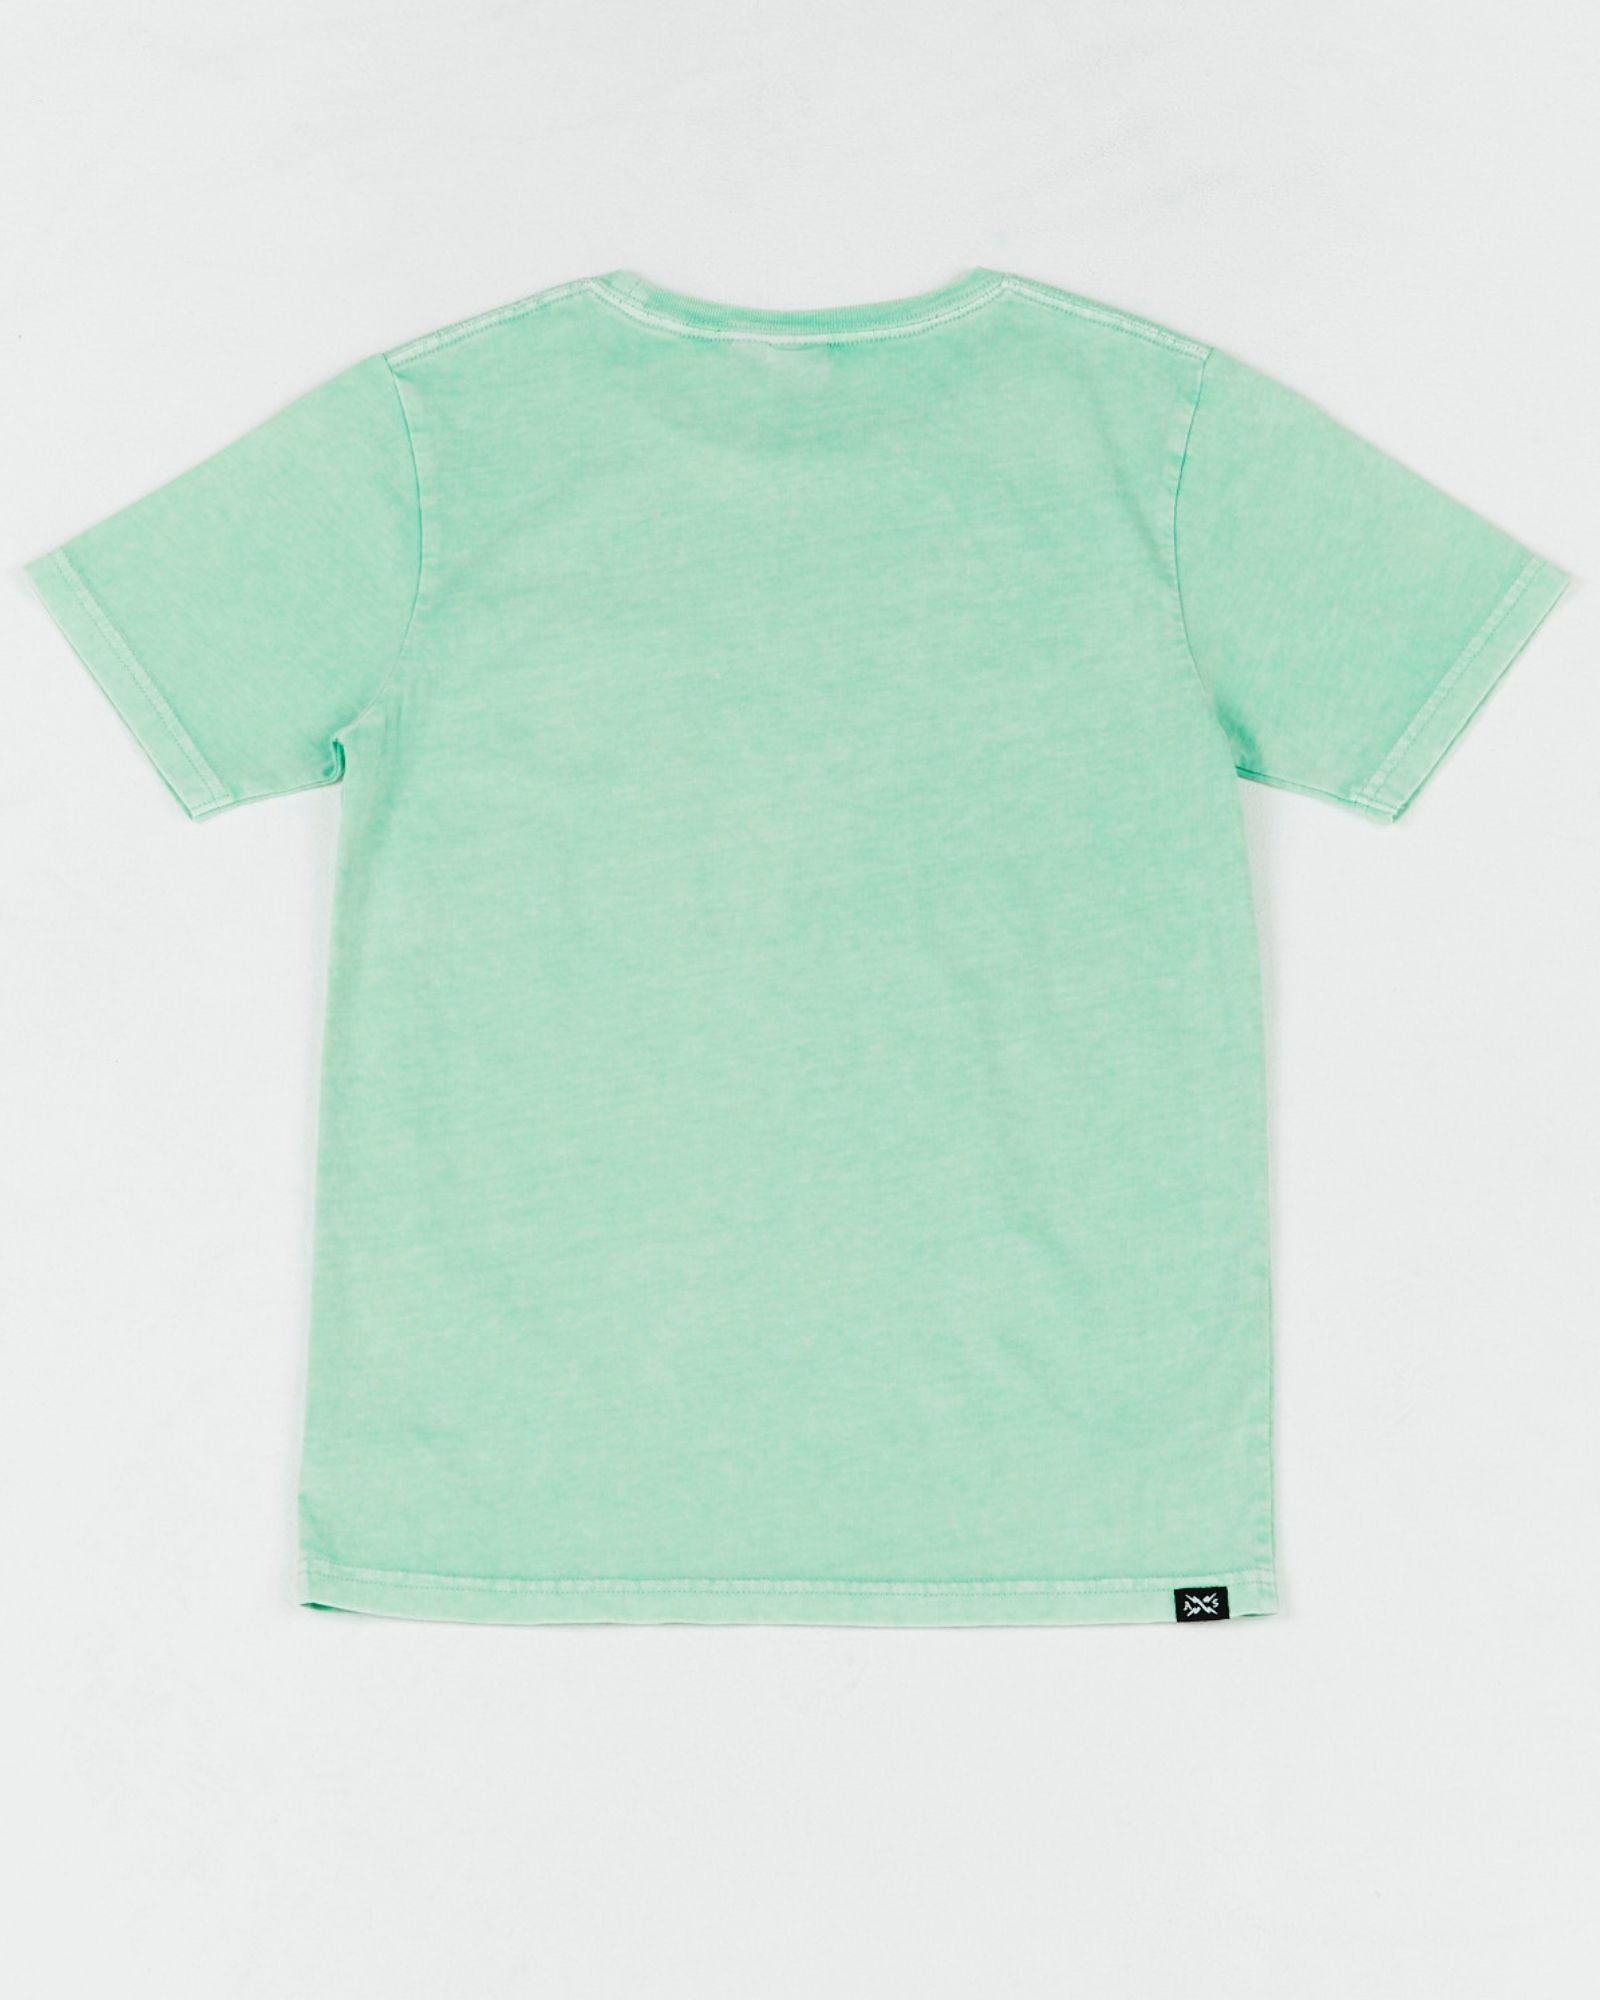 Alphabet Soup's een Go To Pocket Tee for boys aged 8-16. Featuring 100% cotton, pockets, rib neckline in a faded mint hue.